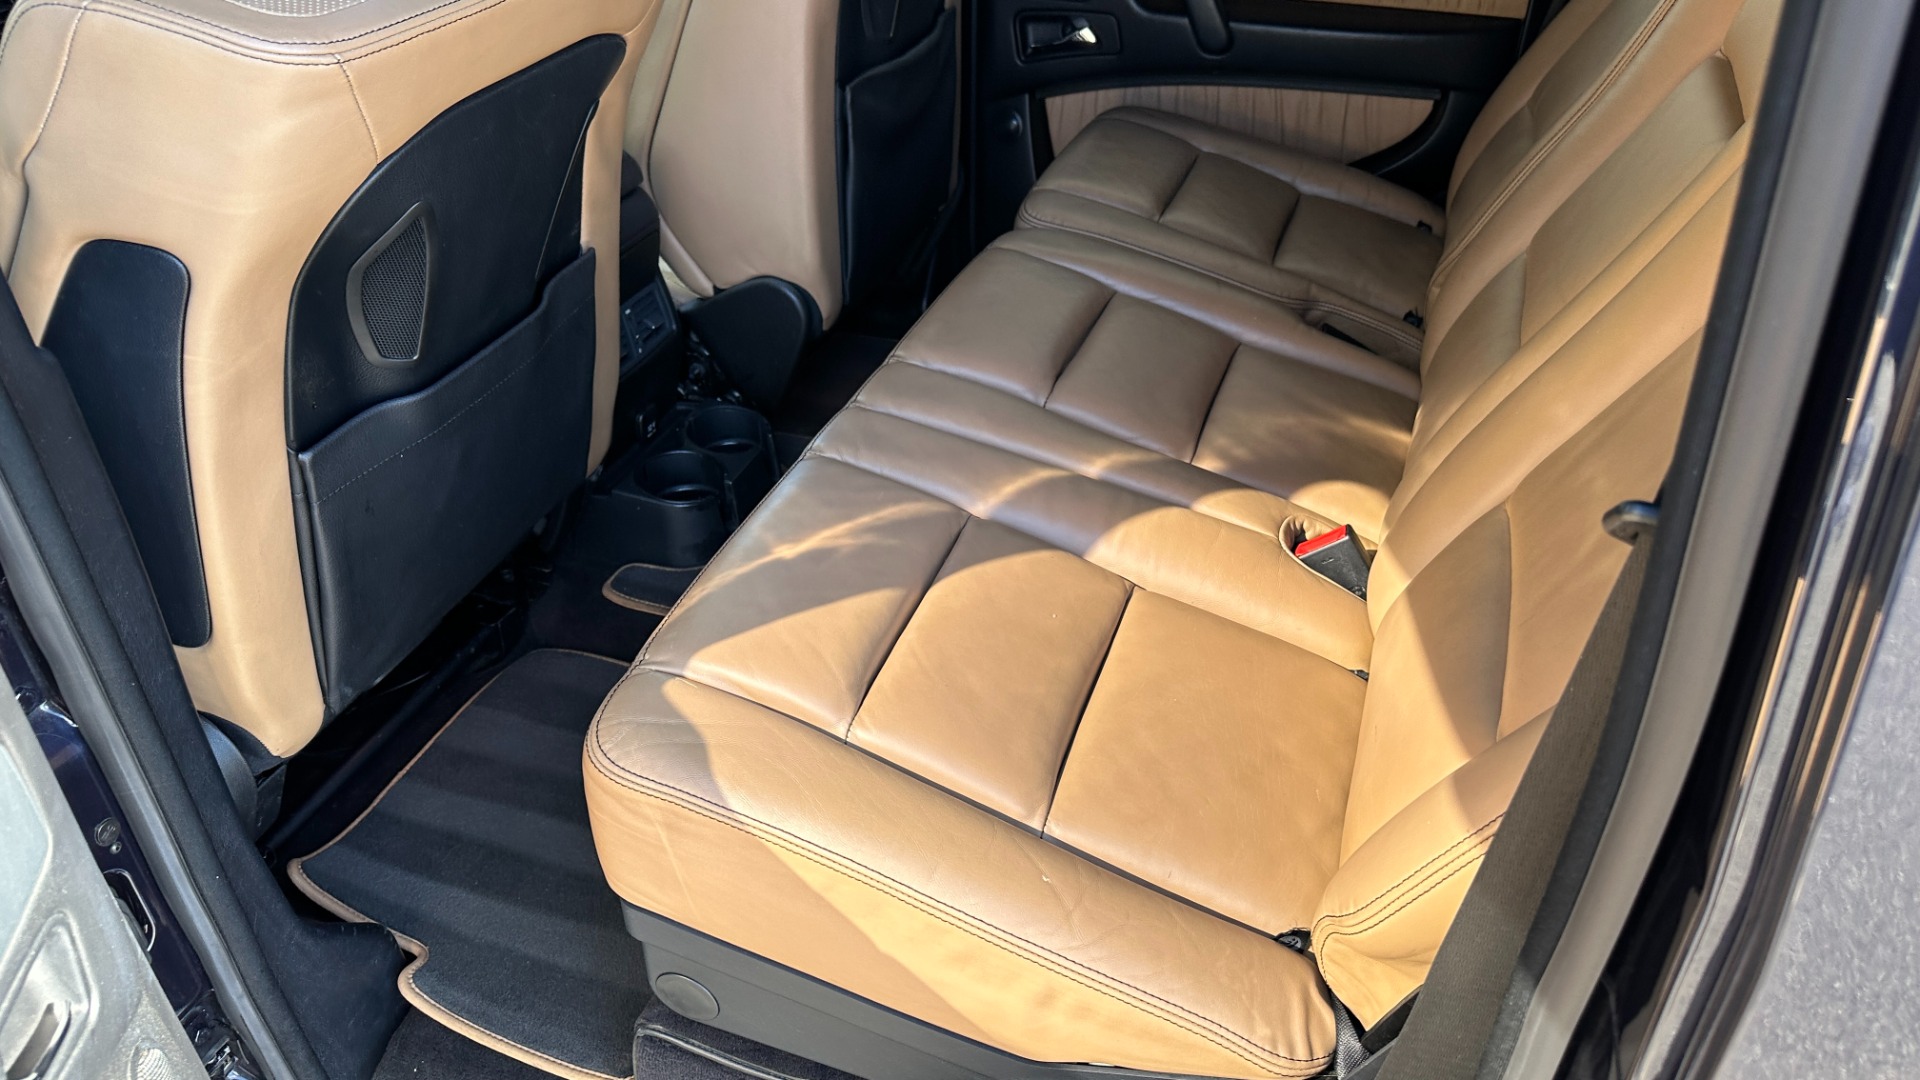 Used 2015 Mercedes-Benz G-Class G550 / DESIGNO NAPPA LEATHER / DESIGNO HEADLINER / HEATED STEERING / NAV /  for sale Sold at Formula Imports in Charlotte NC 28227 22